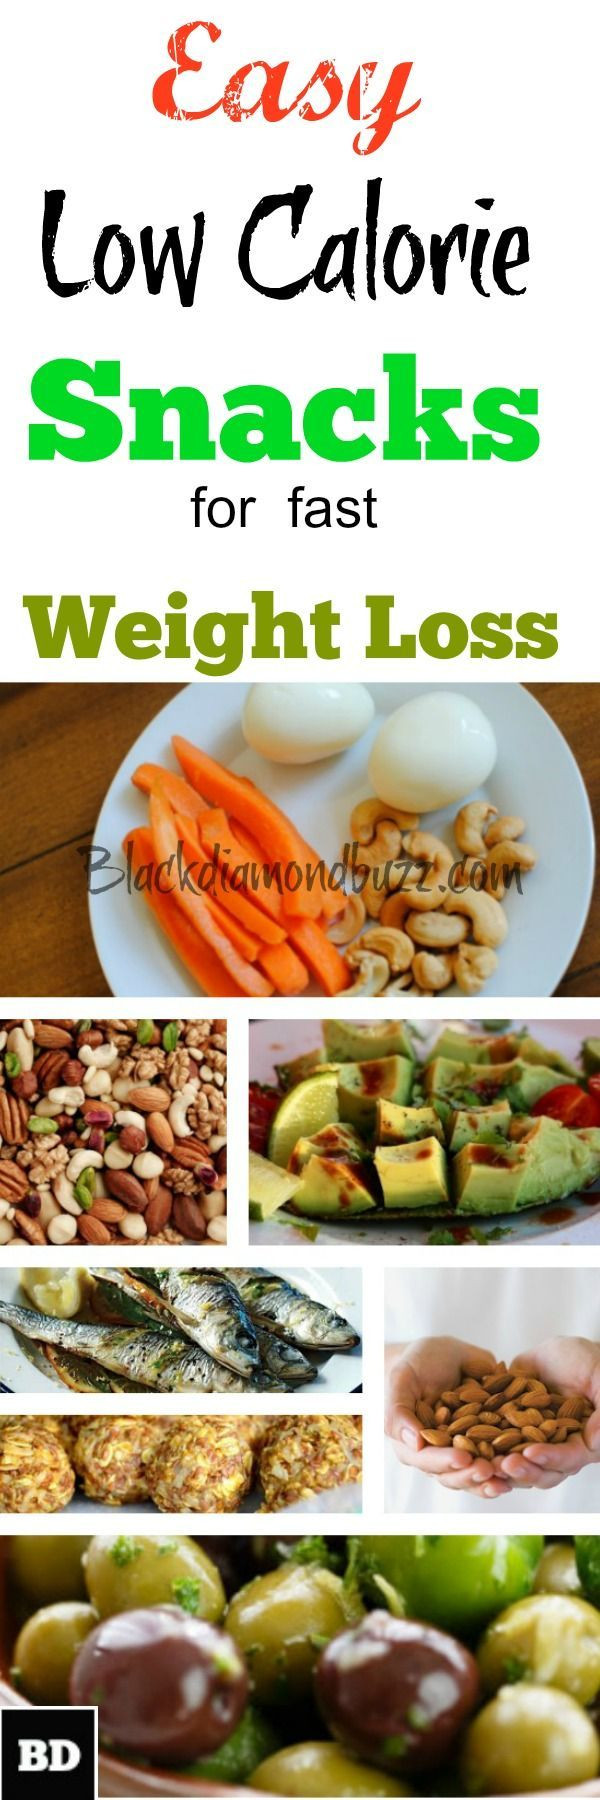 Healthy Snacks For Men'S Weight Loss
 Best 25 Weight loss snacks ideas on Pinterest